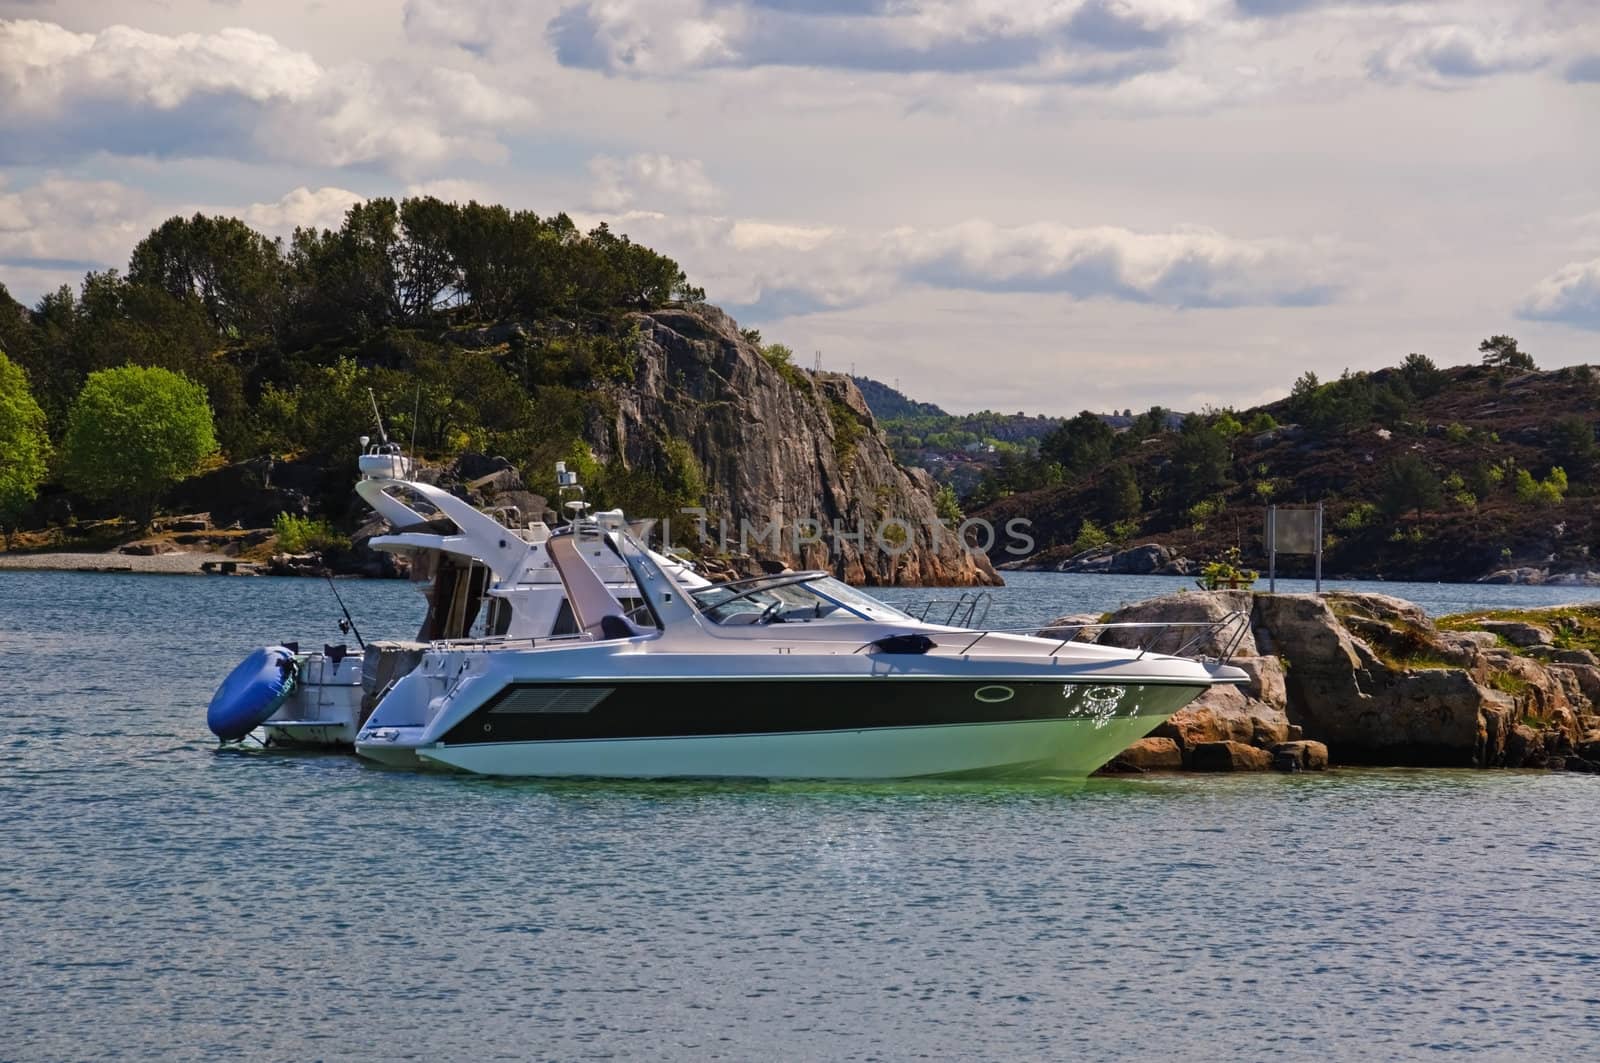 Yacht in the archipelago. The boat is moored to the rocks